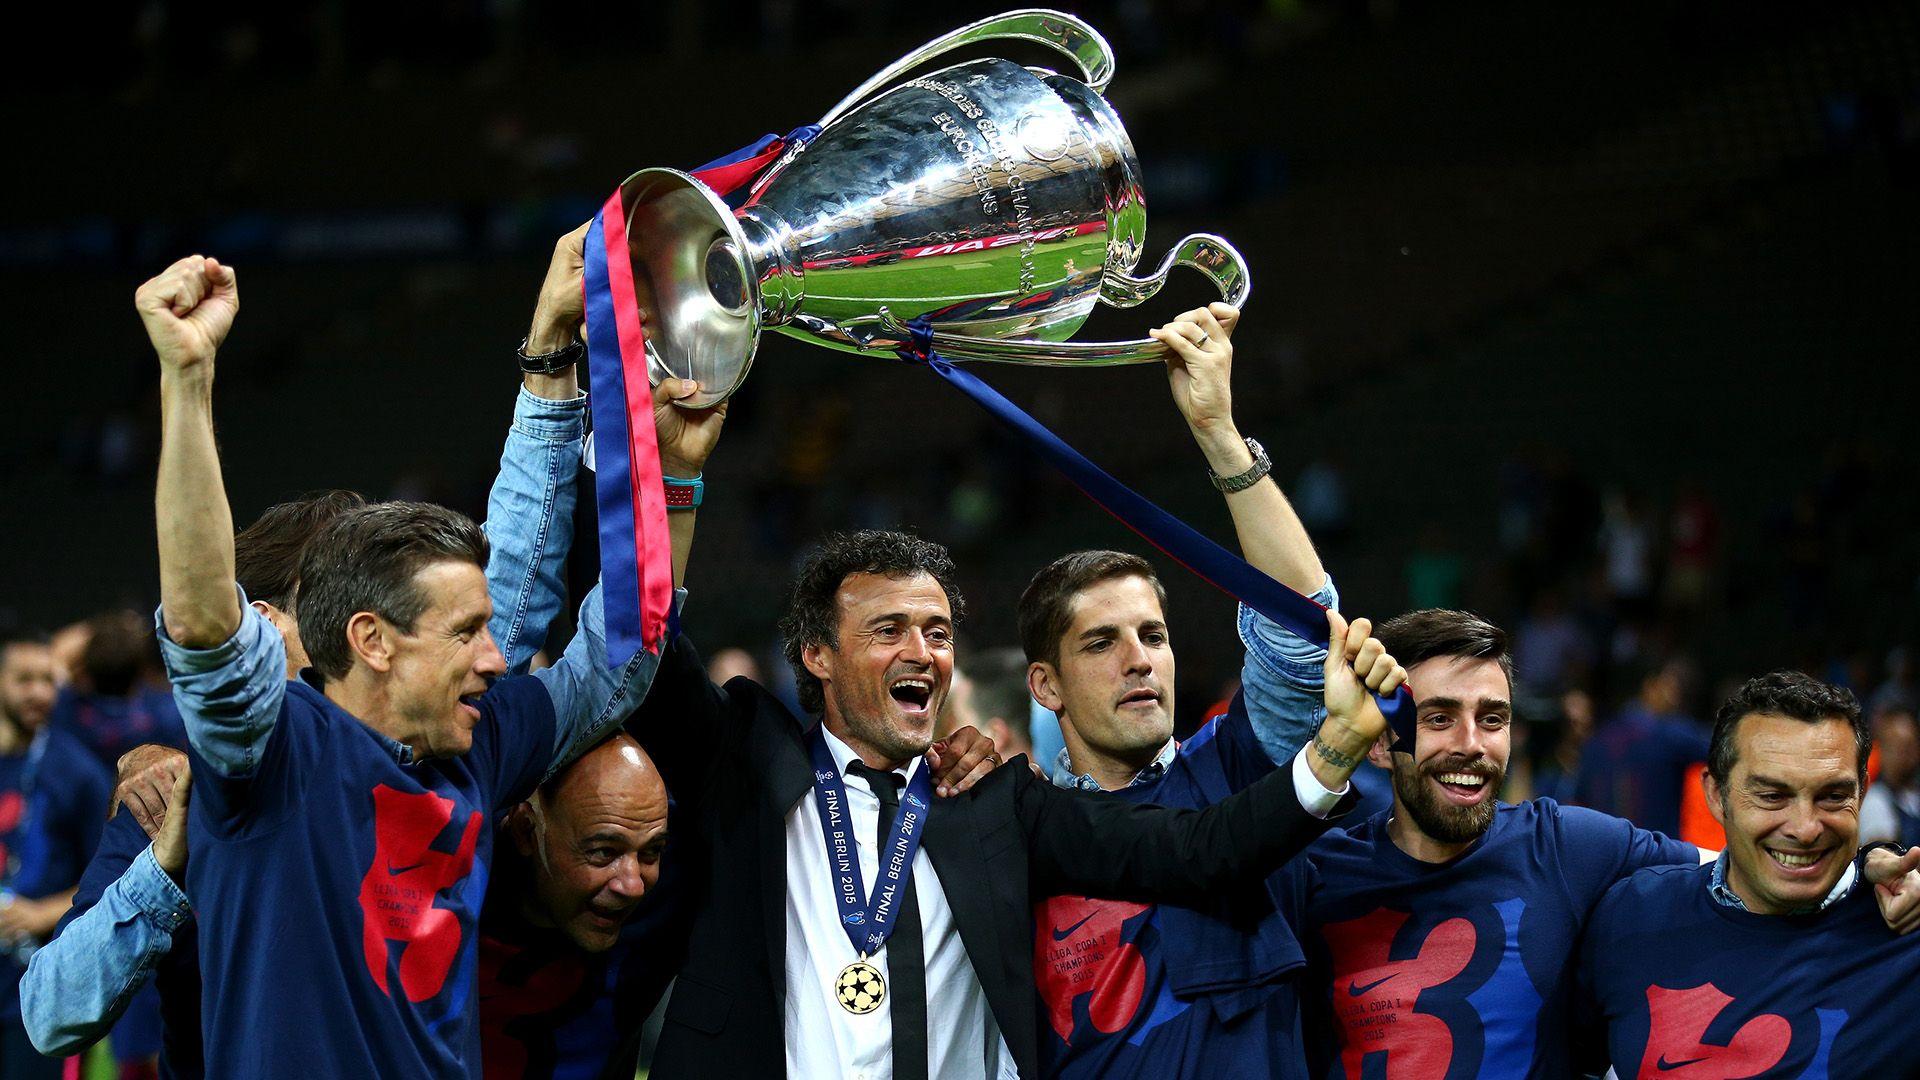 Barcelona should thank Luis Enrique for winning treble he may